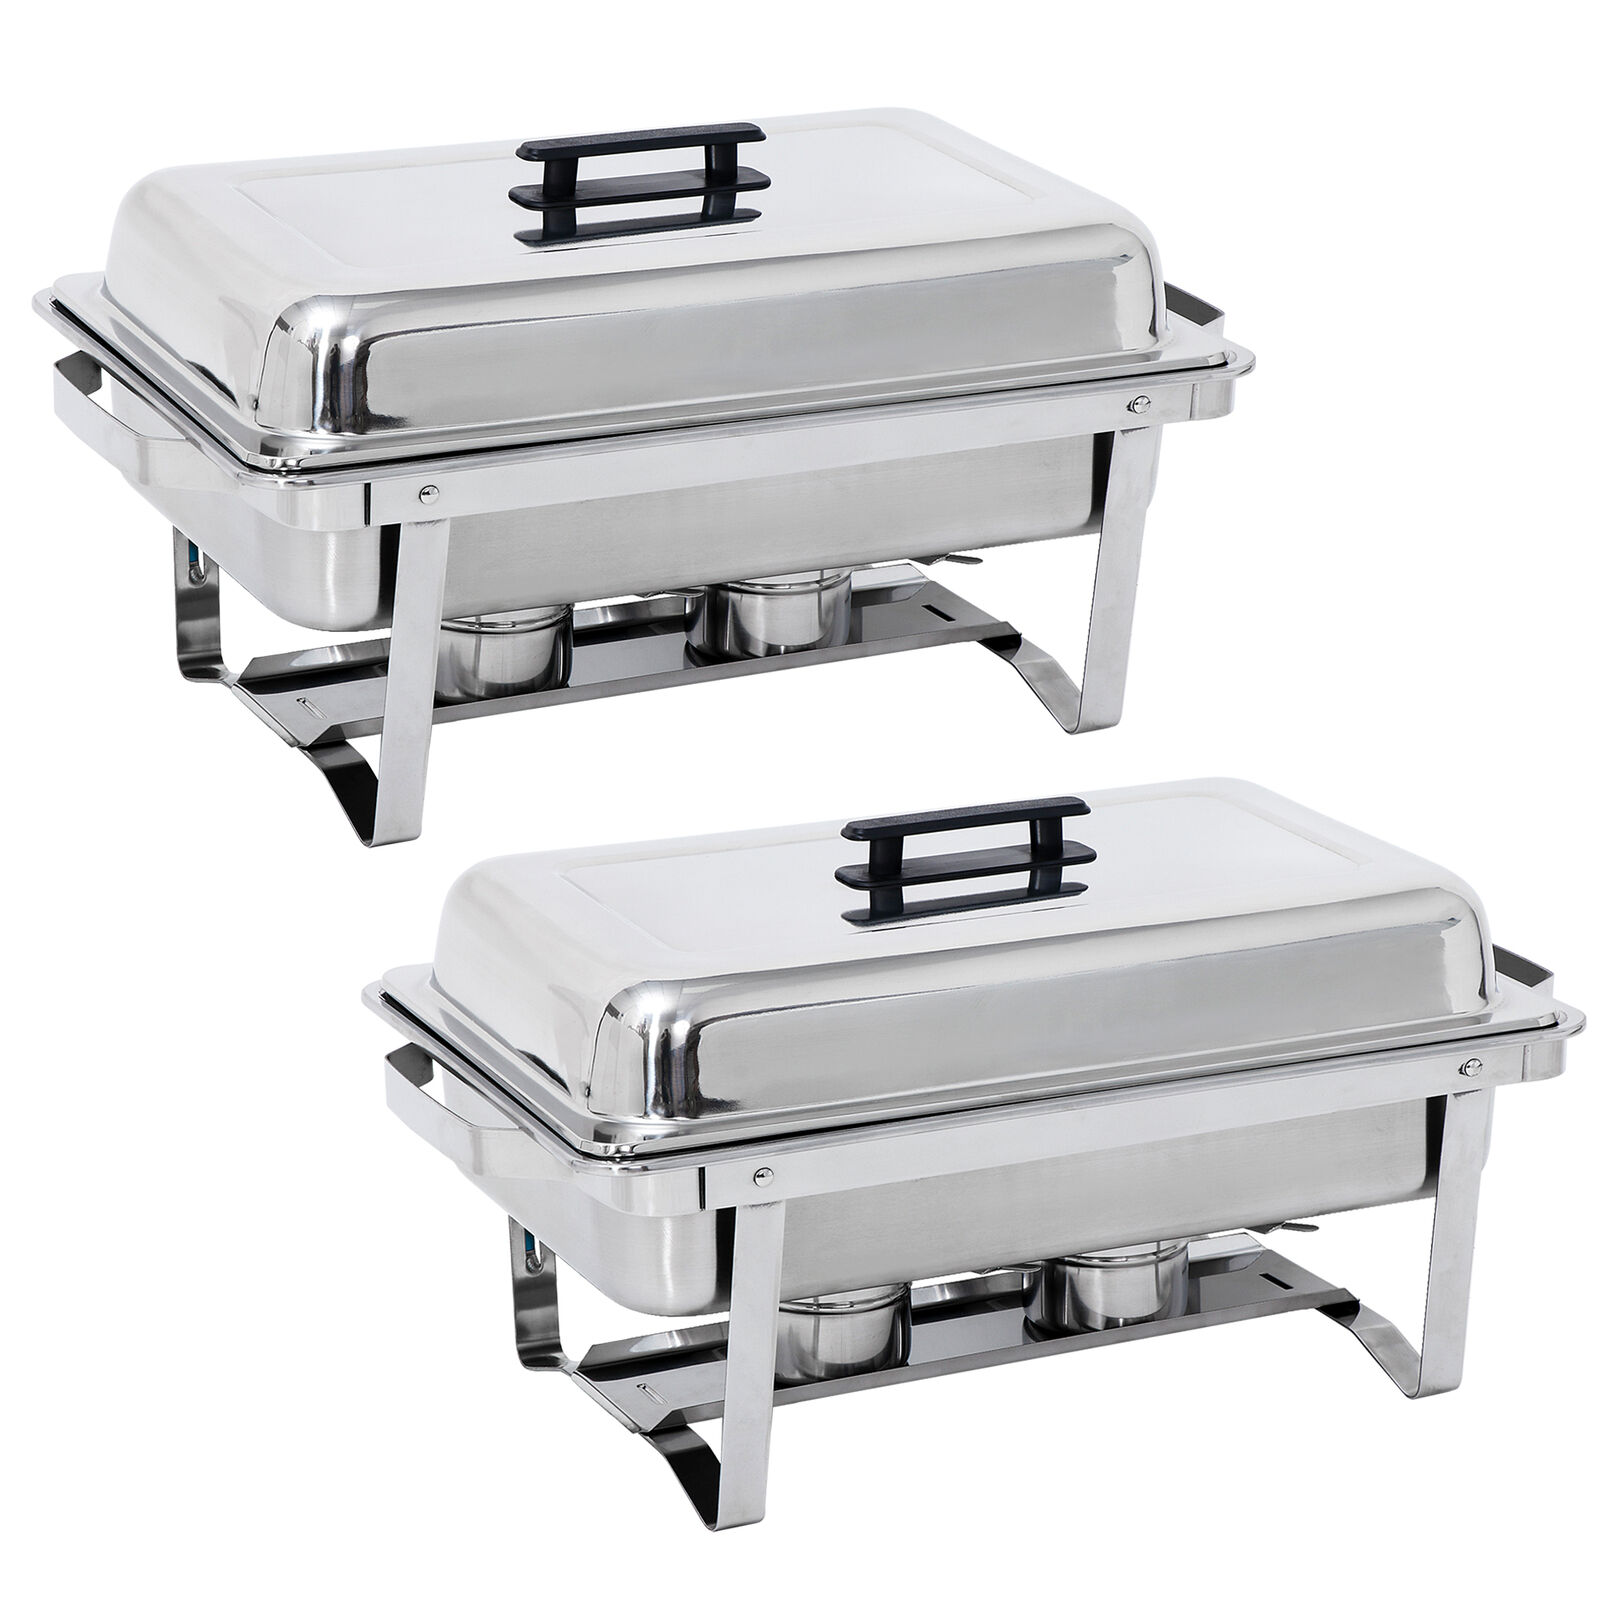 8QT Stainless Steel Chafing Dish Buffet Set Catering Chafer with Foldable Frame 